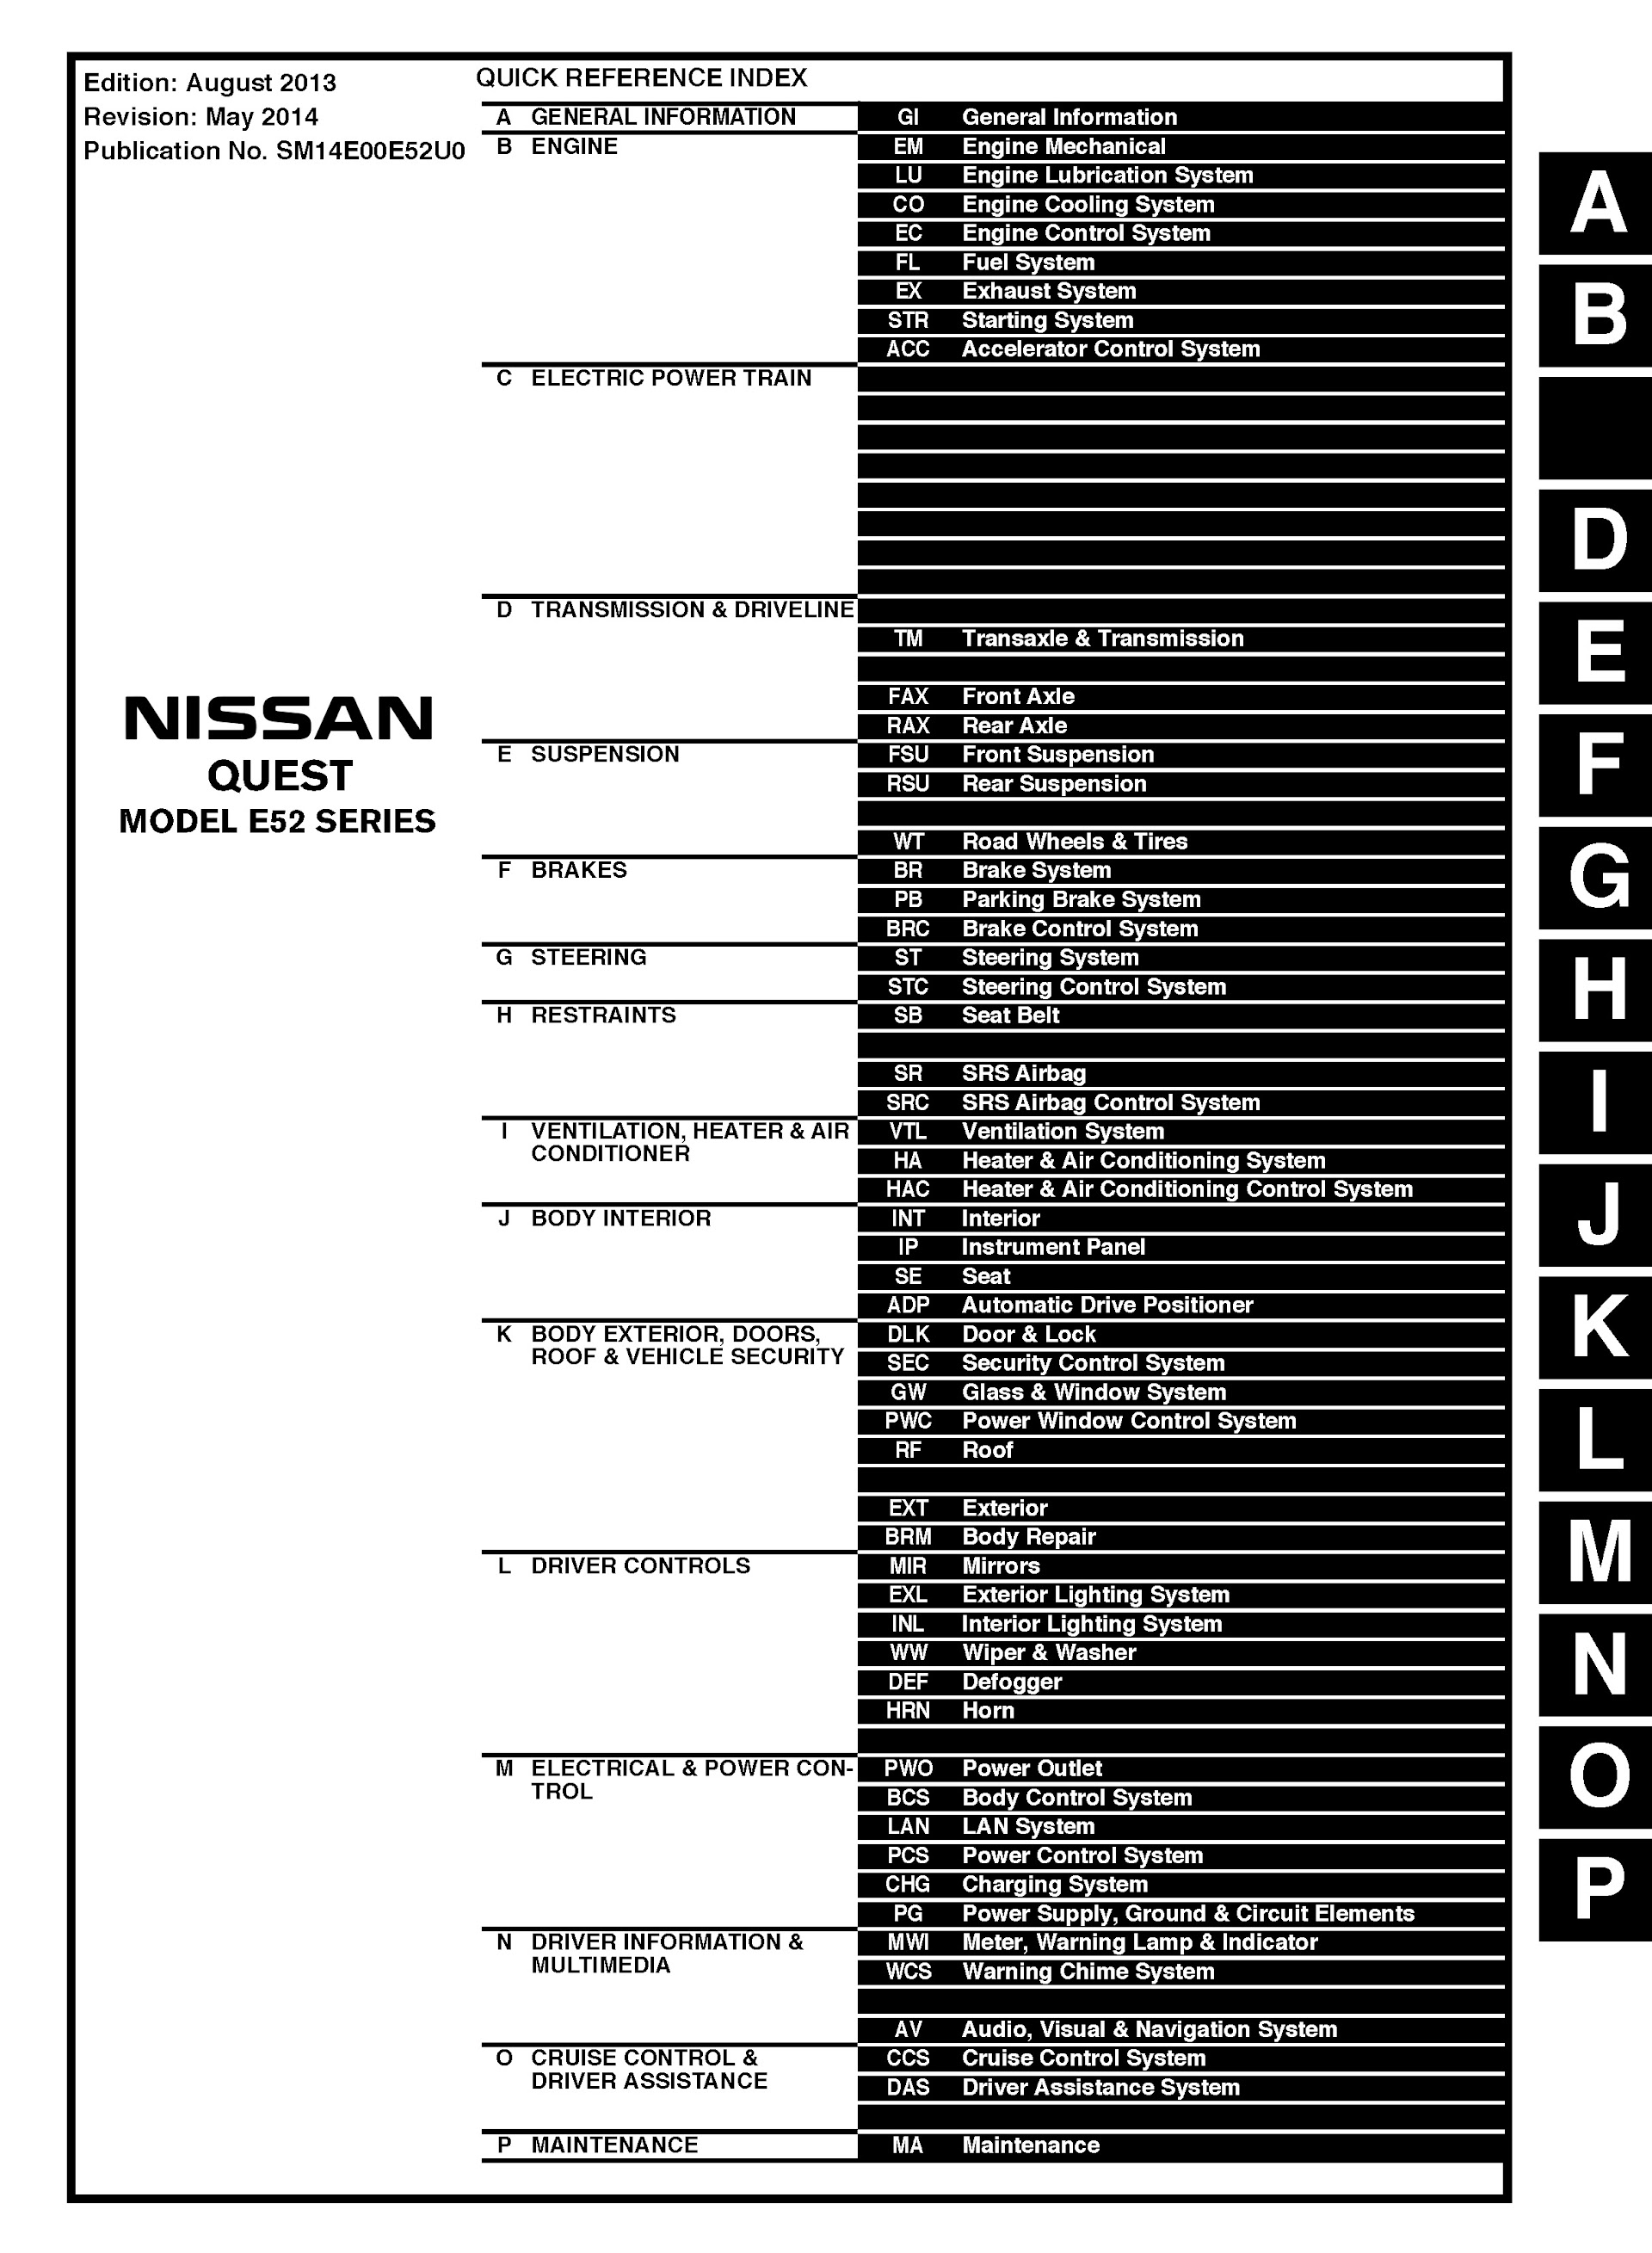 Table of Contents 2014 Nissan Quest Repair Manual